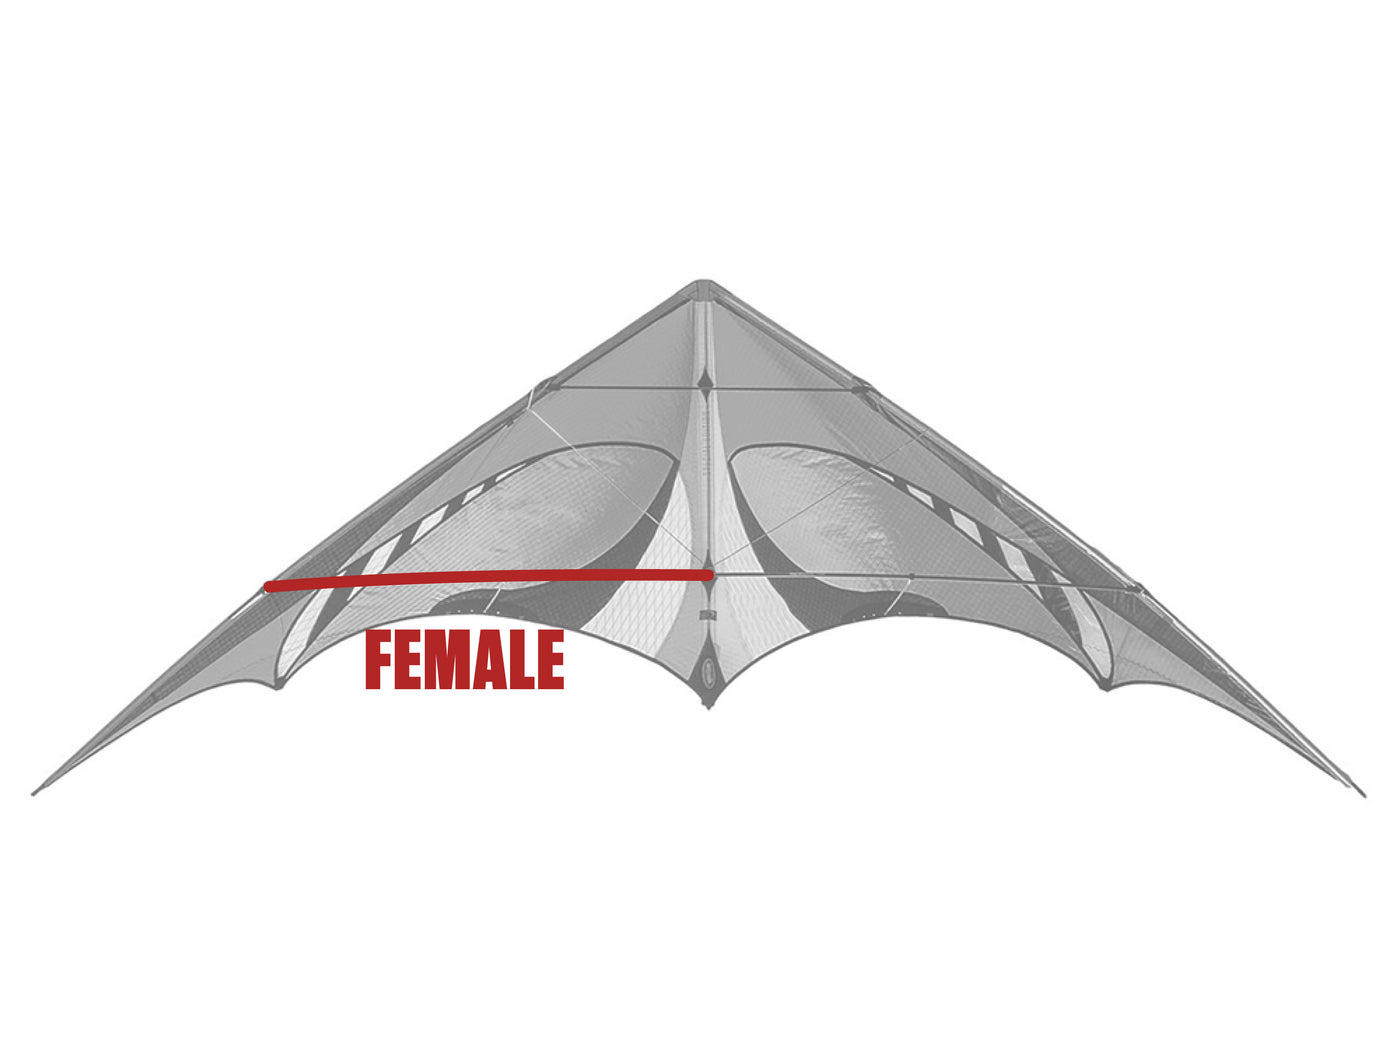 Diagram showing location of the E3 Lower Spreader Female on the kite.